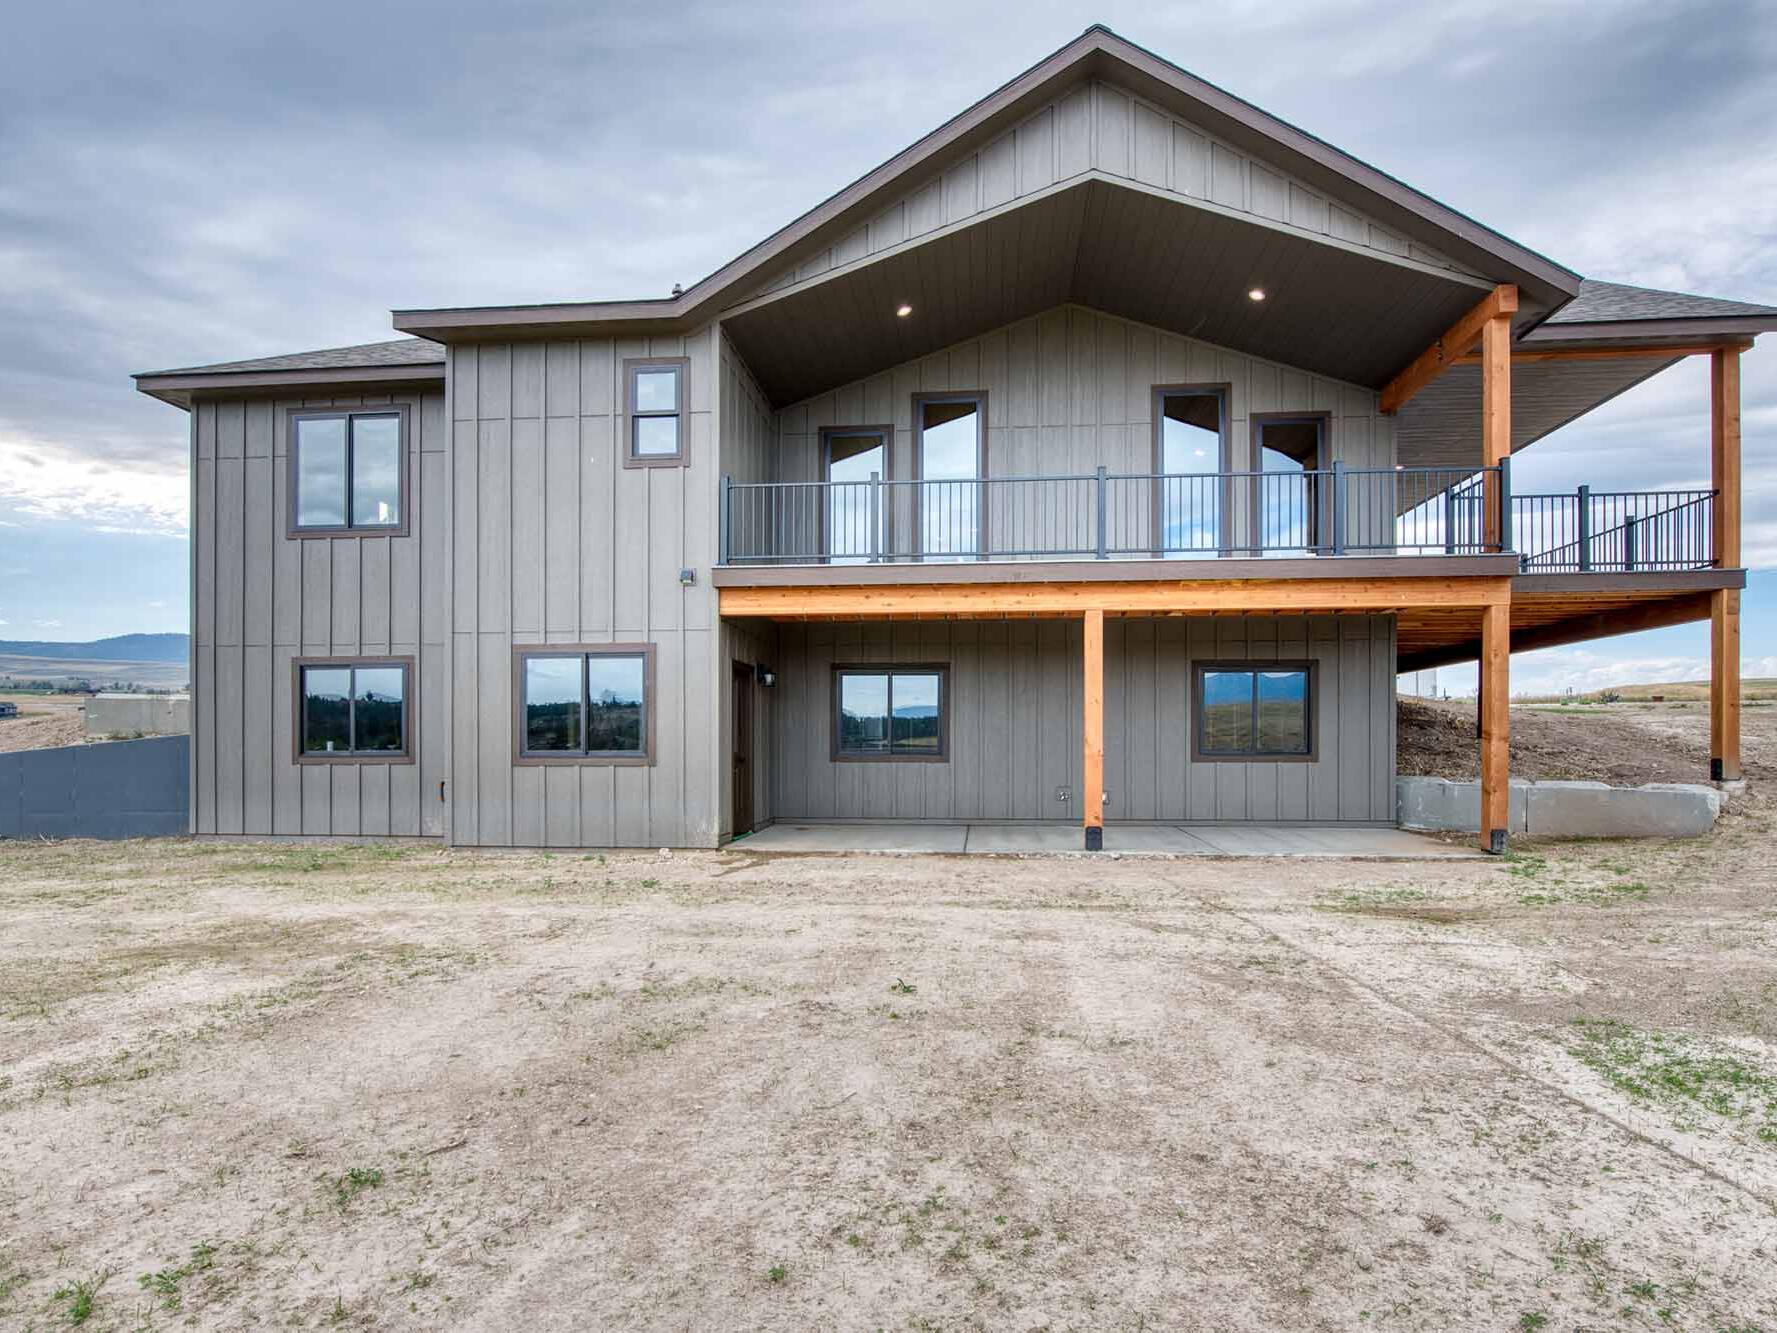 Exterior of a custom home with a covered wrap around porch and timber framing built by Big Sky Builders in Stevensville, MT